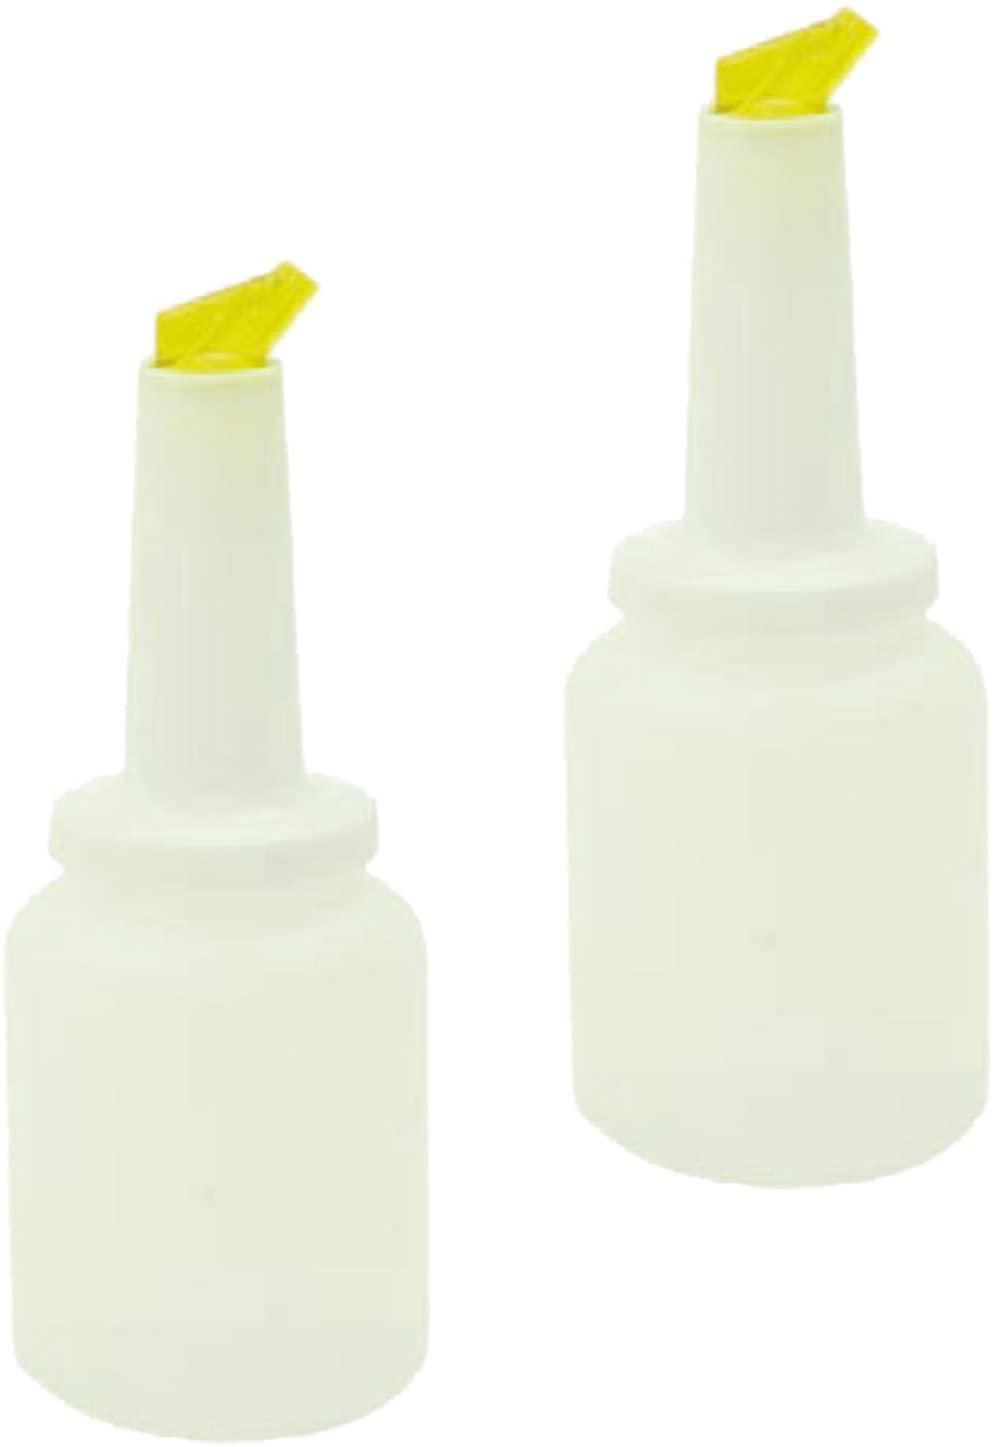 2 Quart Storer and Pourer White Bottle for Alcohol or Juice With Multi